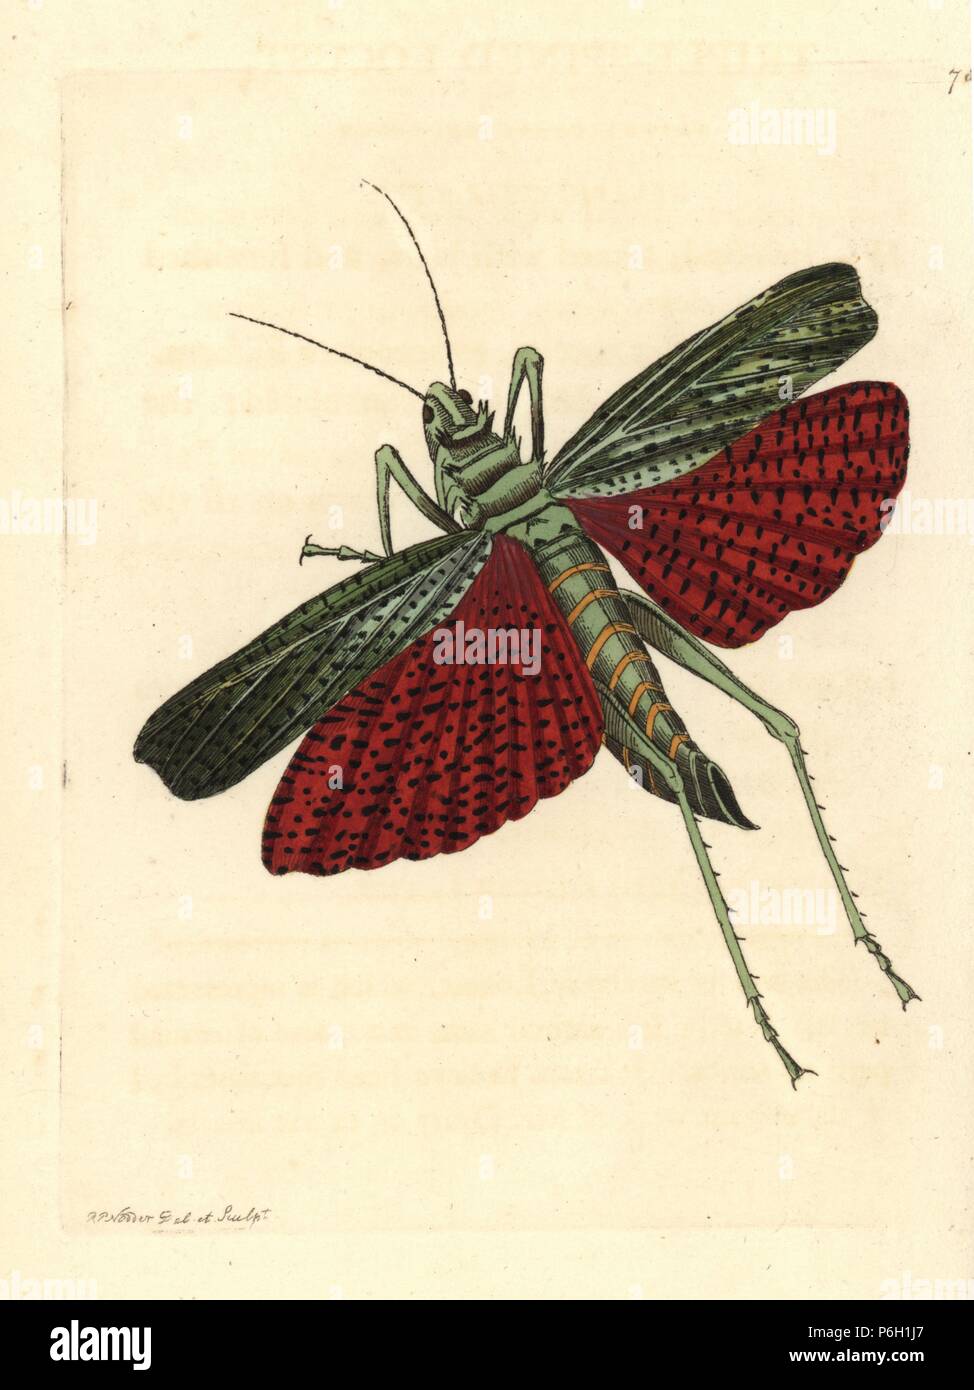 African grasshopper or milkweed locust, Phymateus cinctus (Triple-spined locust, Gryllus squarrosus). Illustration drawn and engraved by Richard Polydore Nodder. Handcoloured copperplate engraving from George Shaw and Frederick Nodder's The Naturalist's Miscellany, London, 1806. Stock Photo